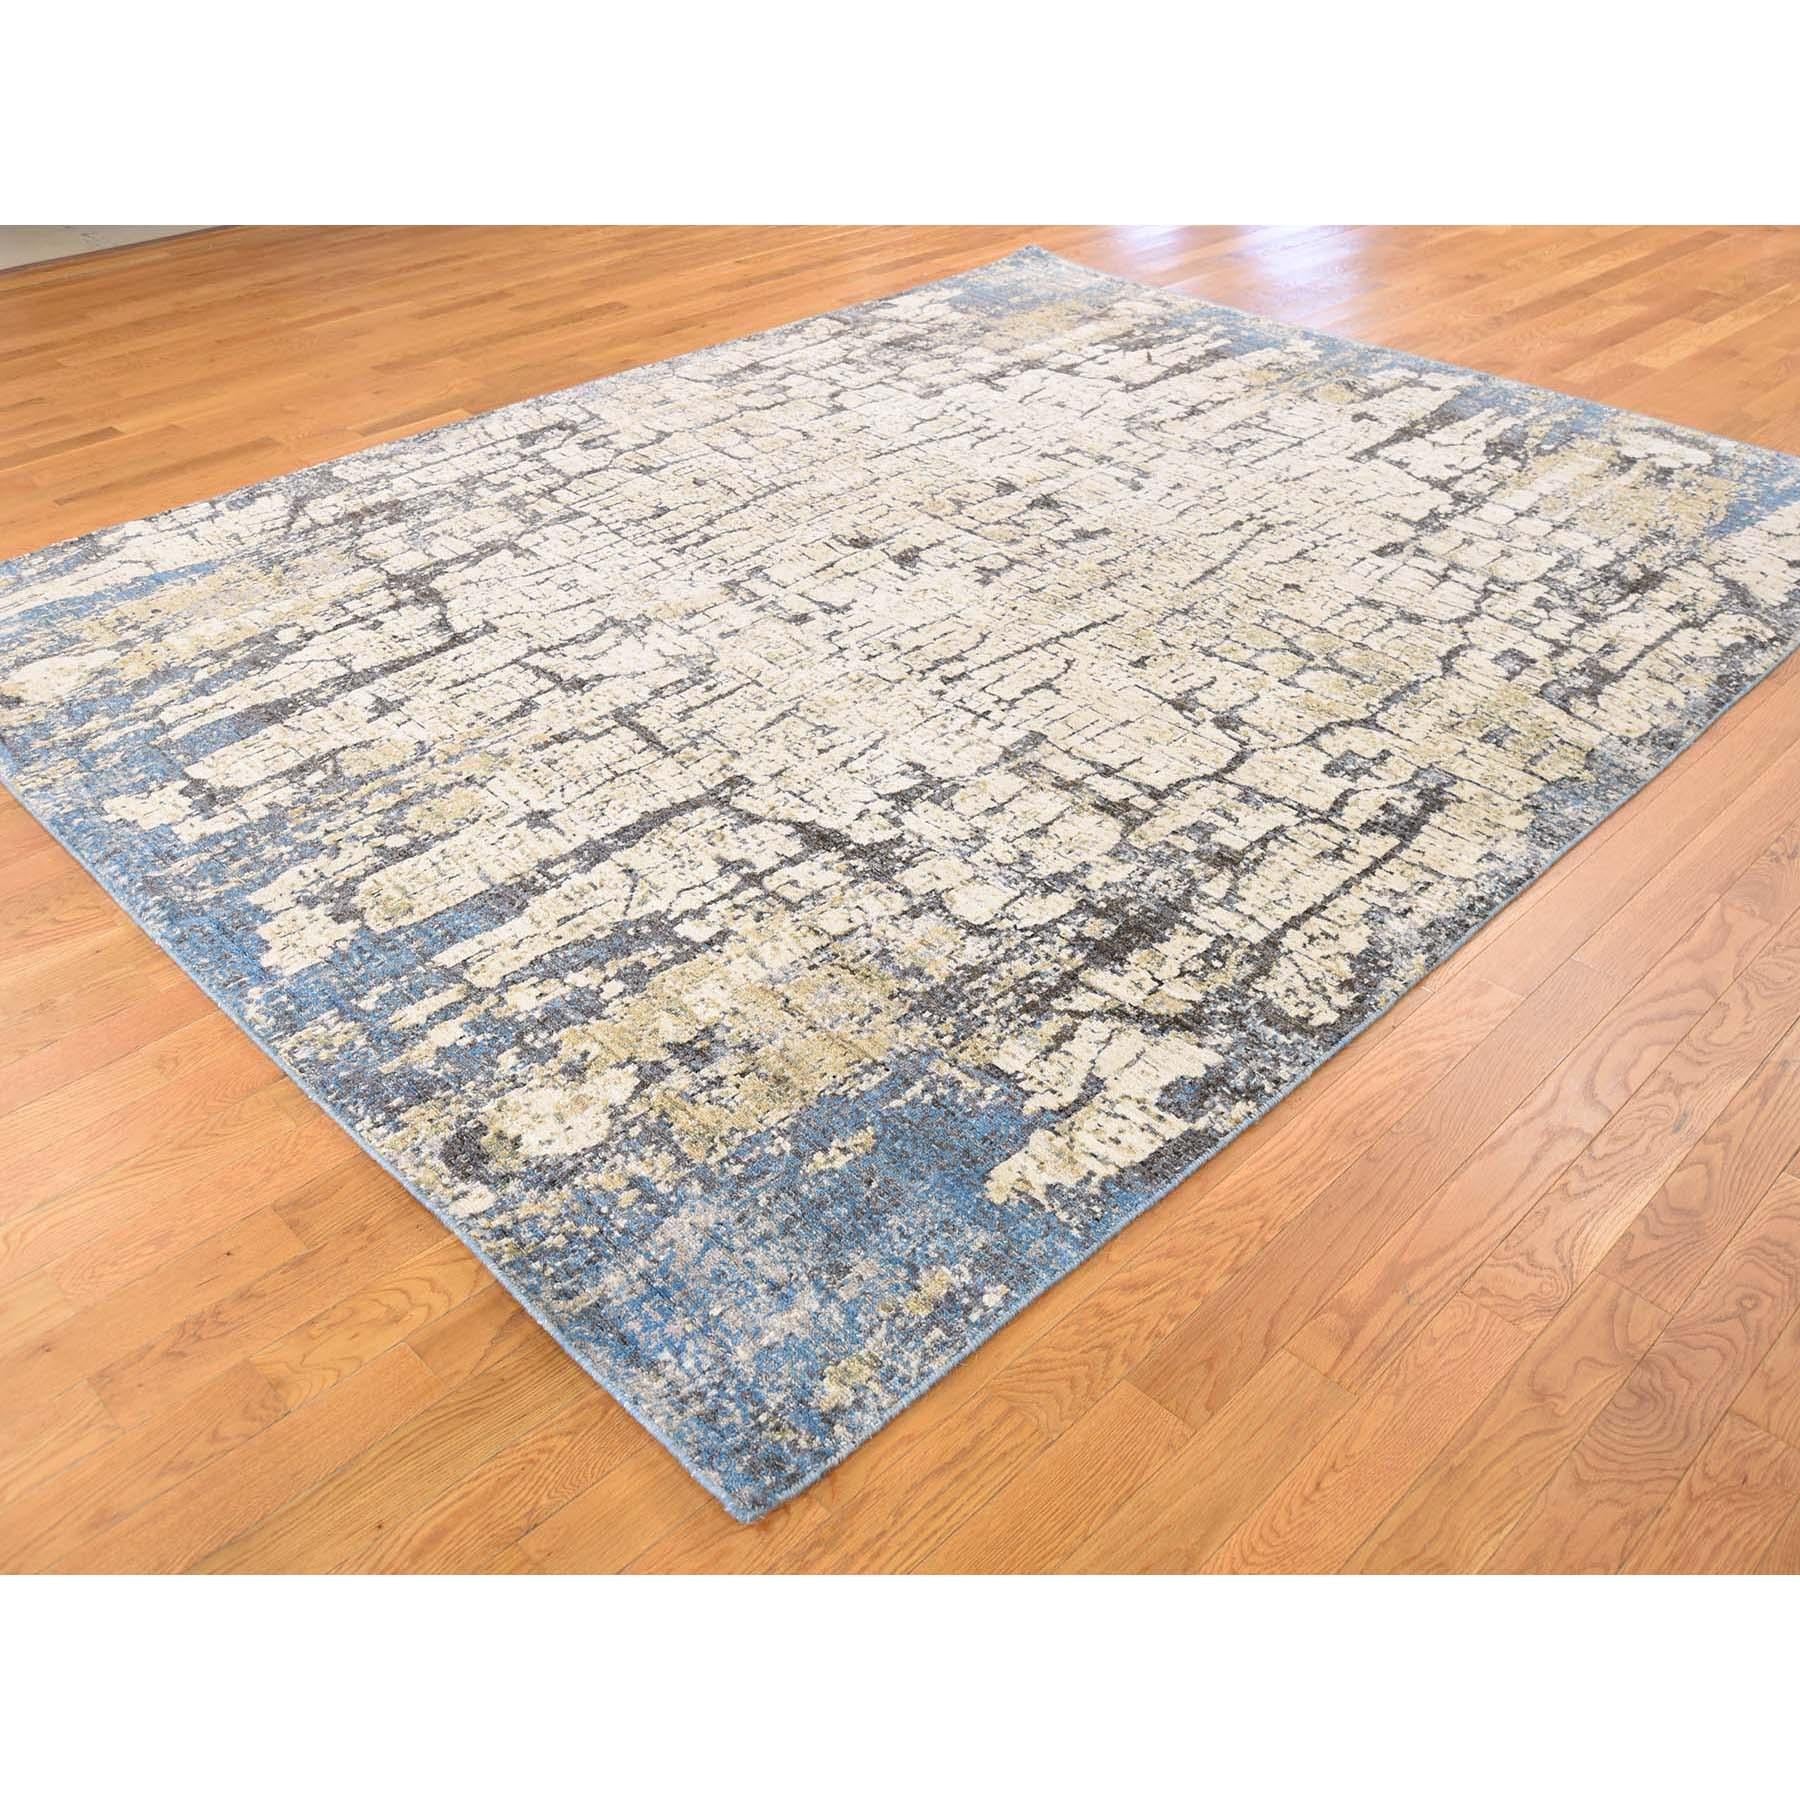 Other Wool and Silk Abstract with Tree Bark Design Oriental Rug